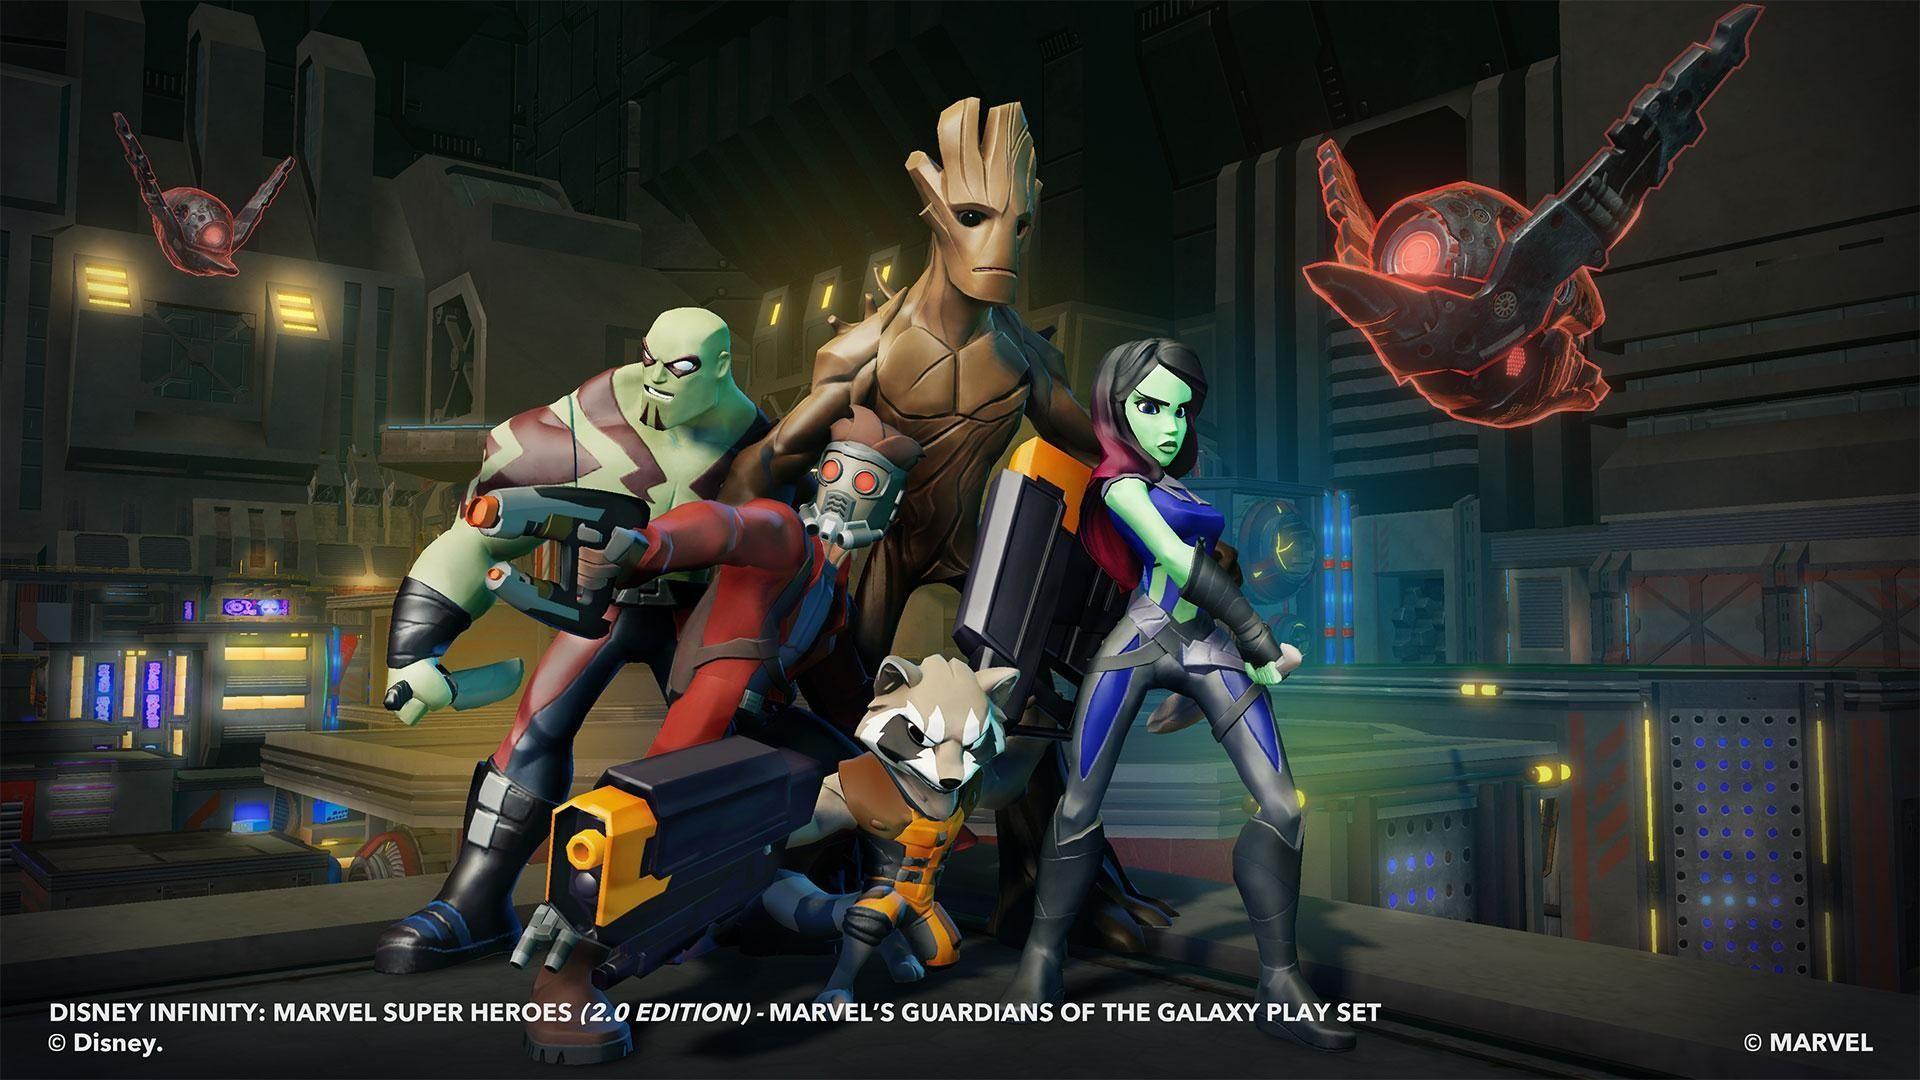 disney infinity 2.0 wallpaper Google. Things about